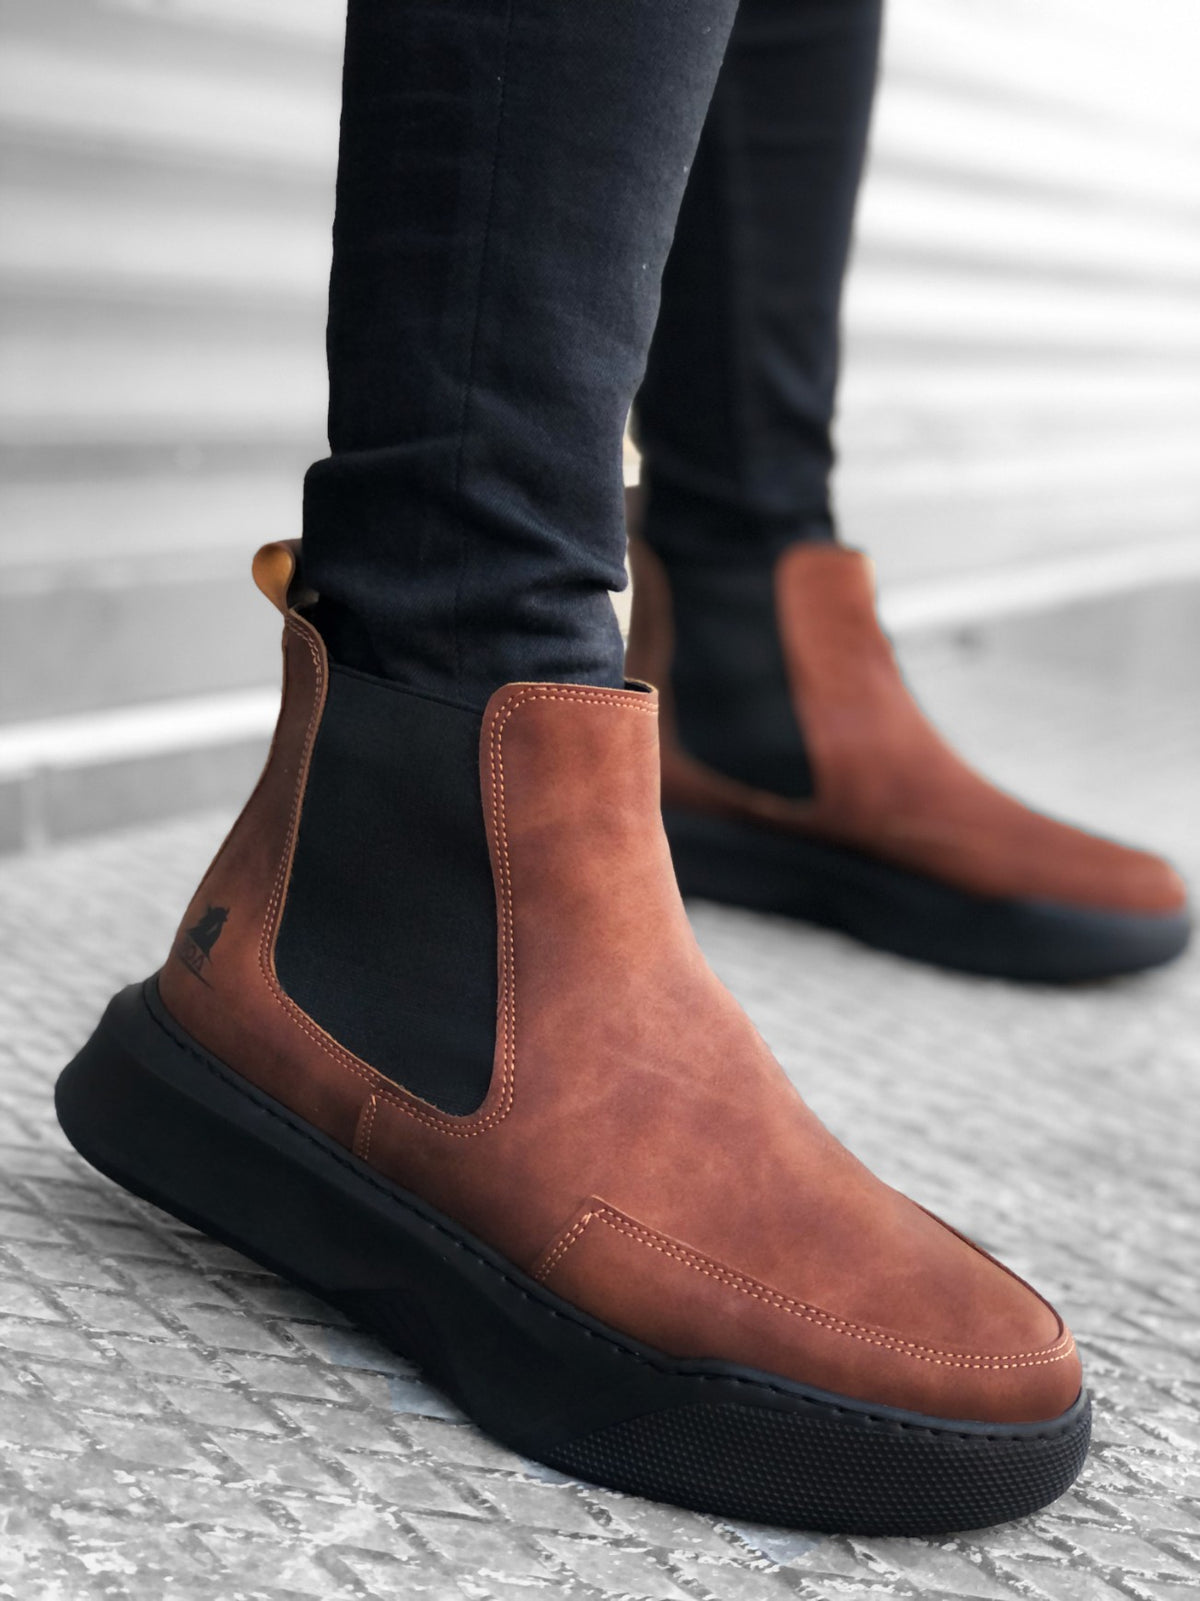 BA0150 Slip-On Band Men's High Sole Brown Sport Boots - STREETMODE ™